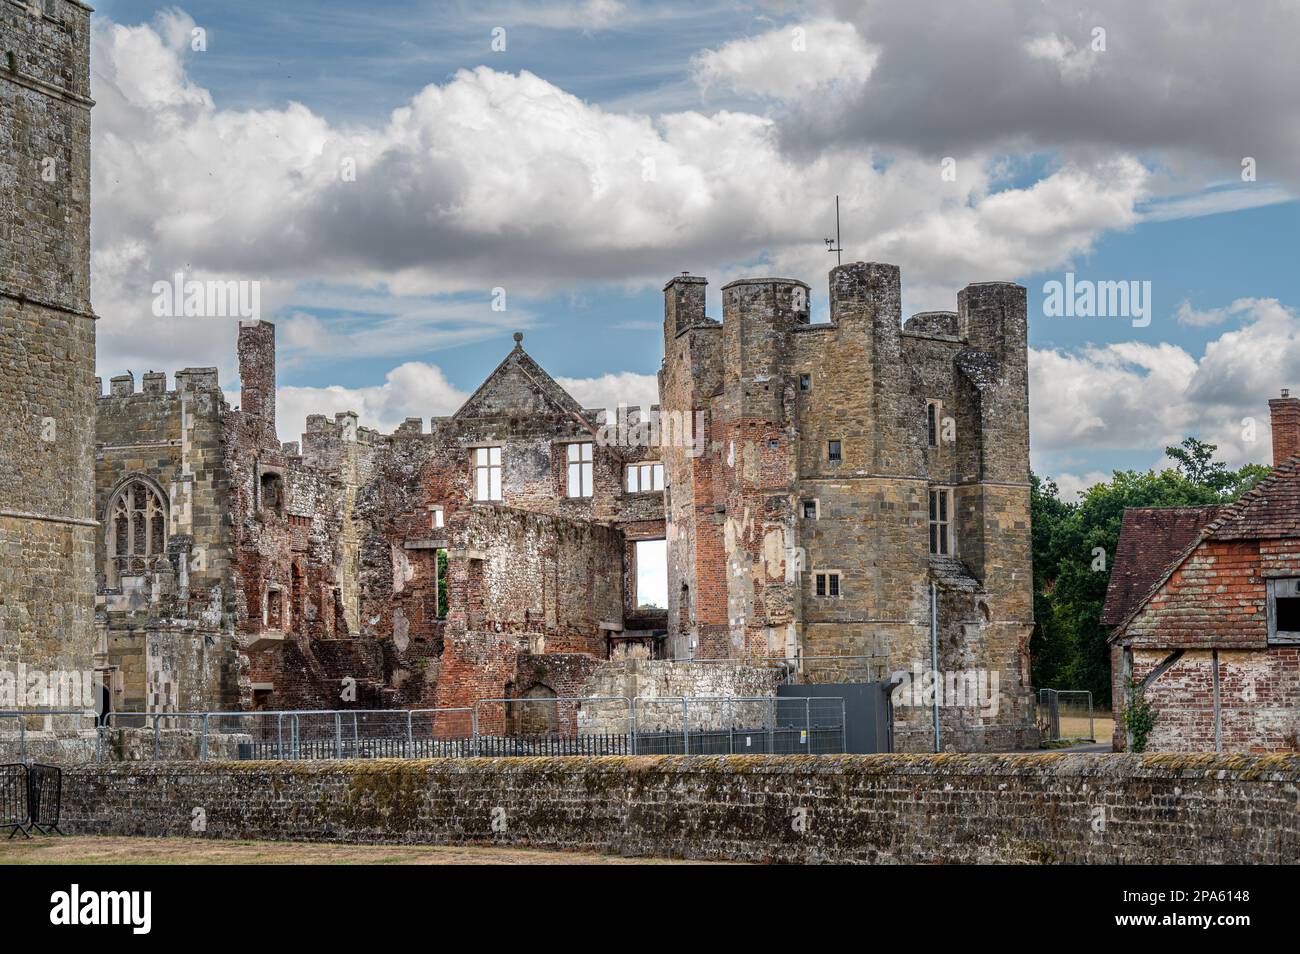 The ruins of Cowdray House, an example of a Tudor mansion, in Midhurst, West Sussex, England on 4th August, 2022 Stock Photo